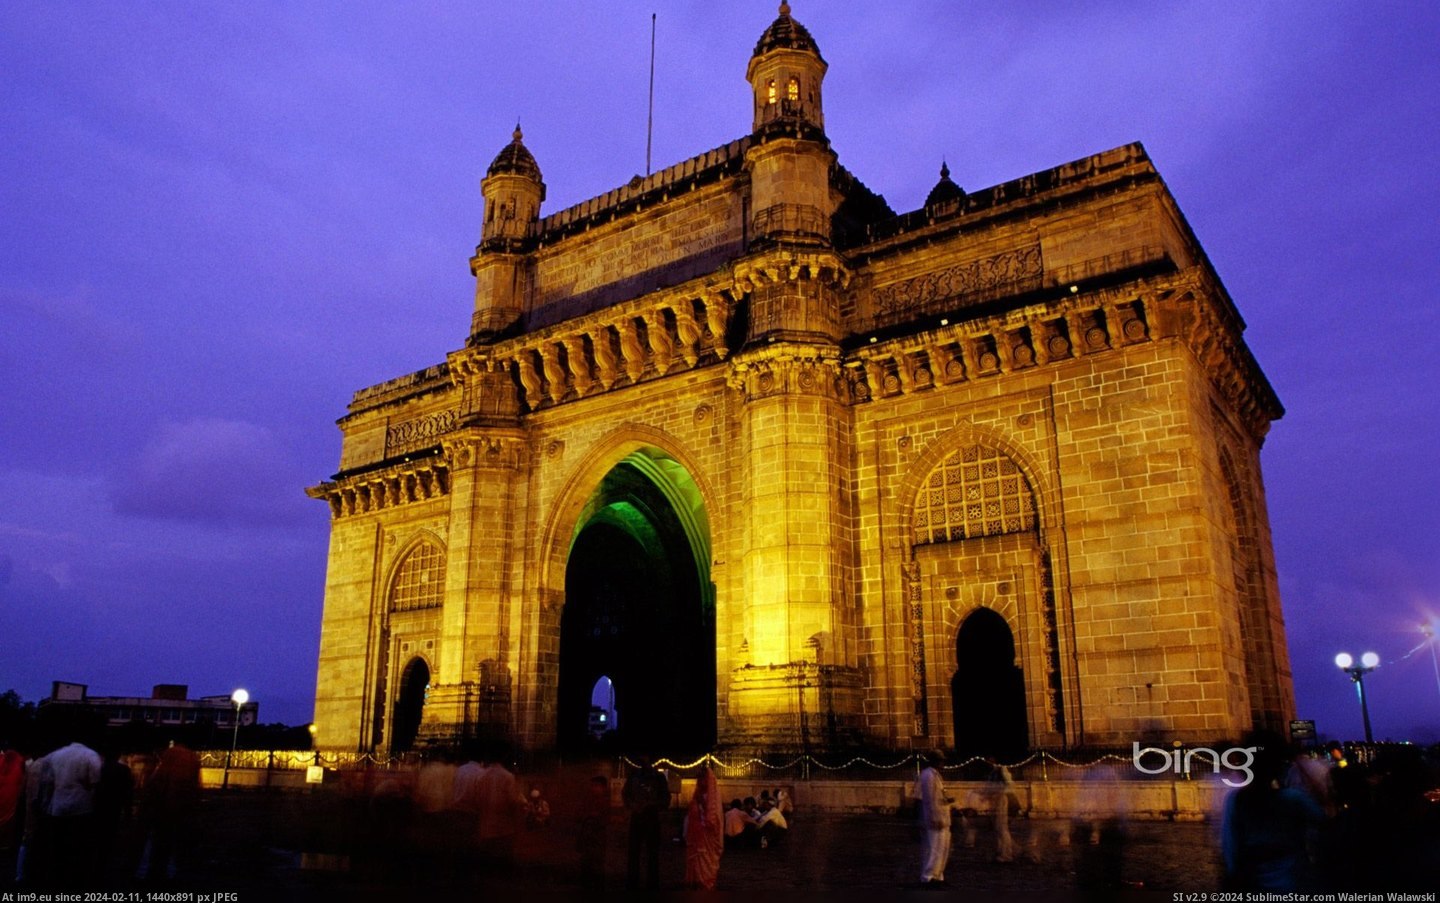 Gateway of India at dusk, Mumbai, India (©Getty Images) (in Best photos of January 2013)